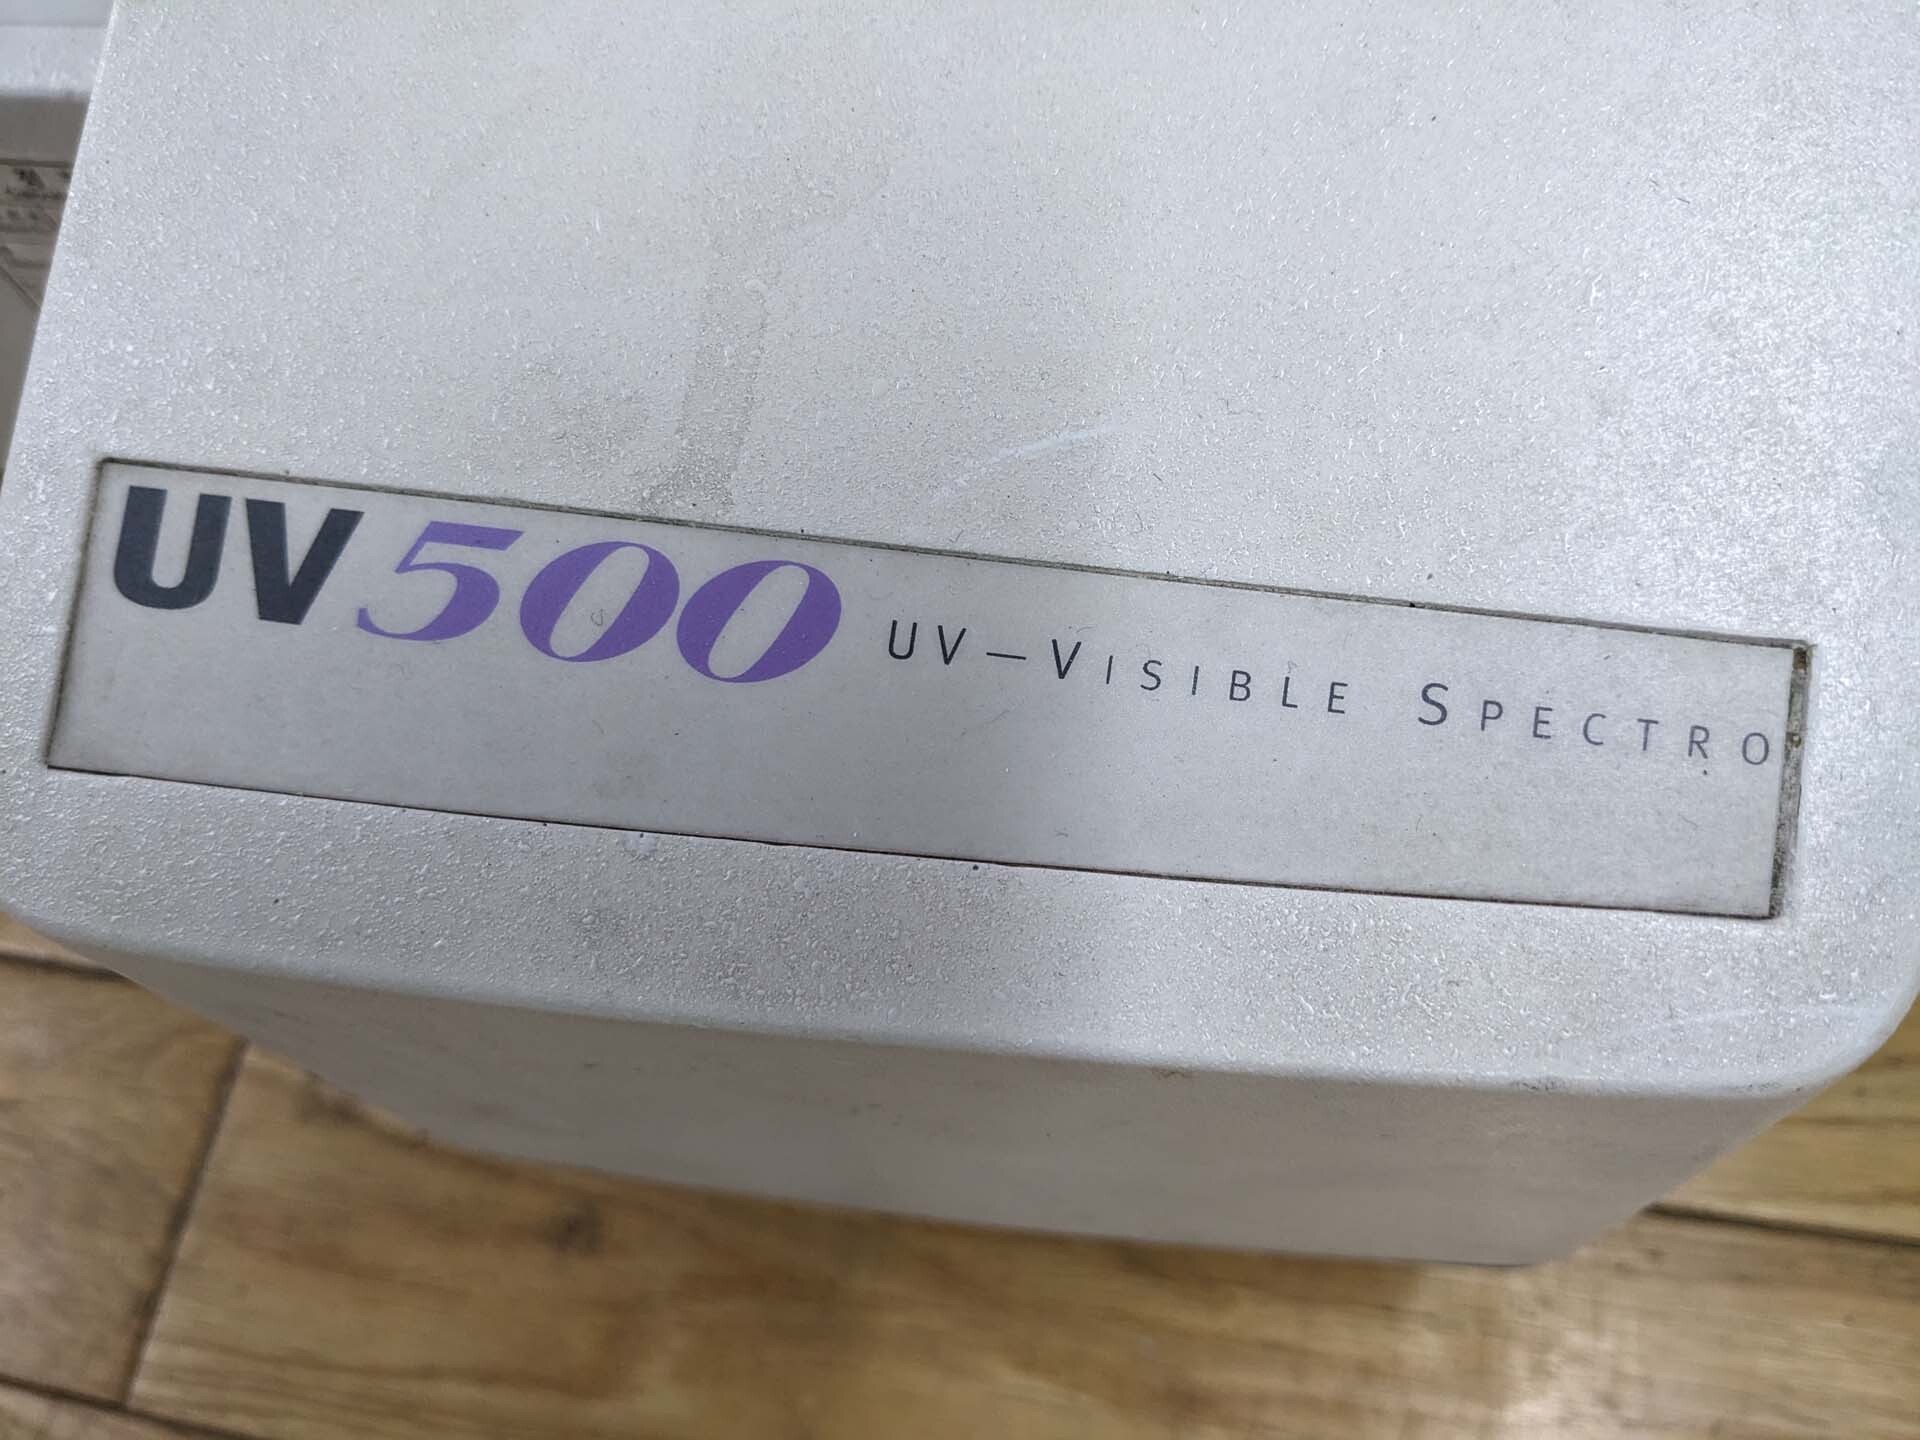 Photo Used THERMO SPECTRONICS UV550 For Sale